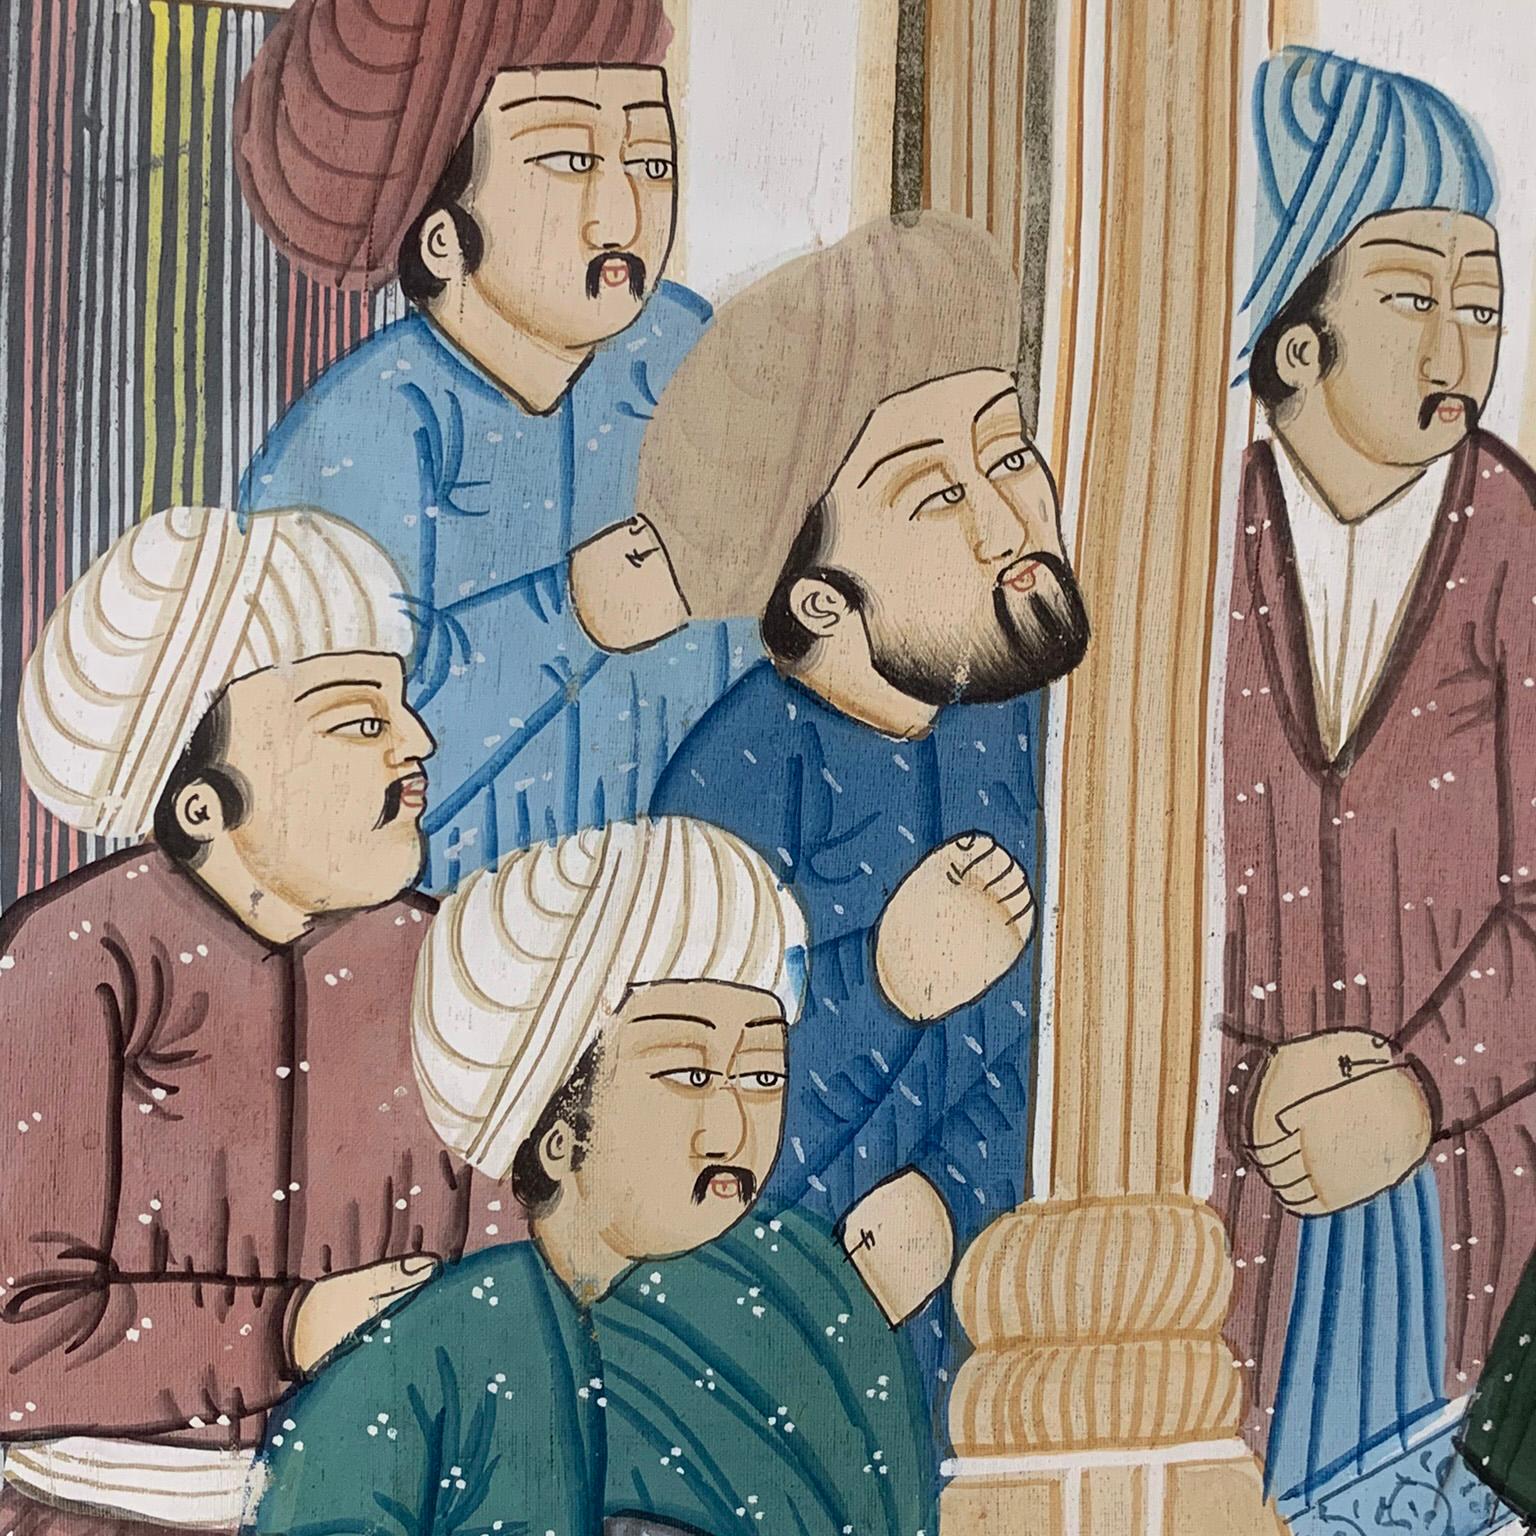 John Wissemann (American, 20th century) Persian Illumination. Colored pencil drawing on linen depicting turbaned gentleman paying tribute to a seated royal. The work is unsigned, 40 x 29 inches, framed: 46 1/2 x 34 x 1 inch. 

Note: Wissemann is a